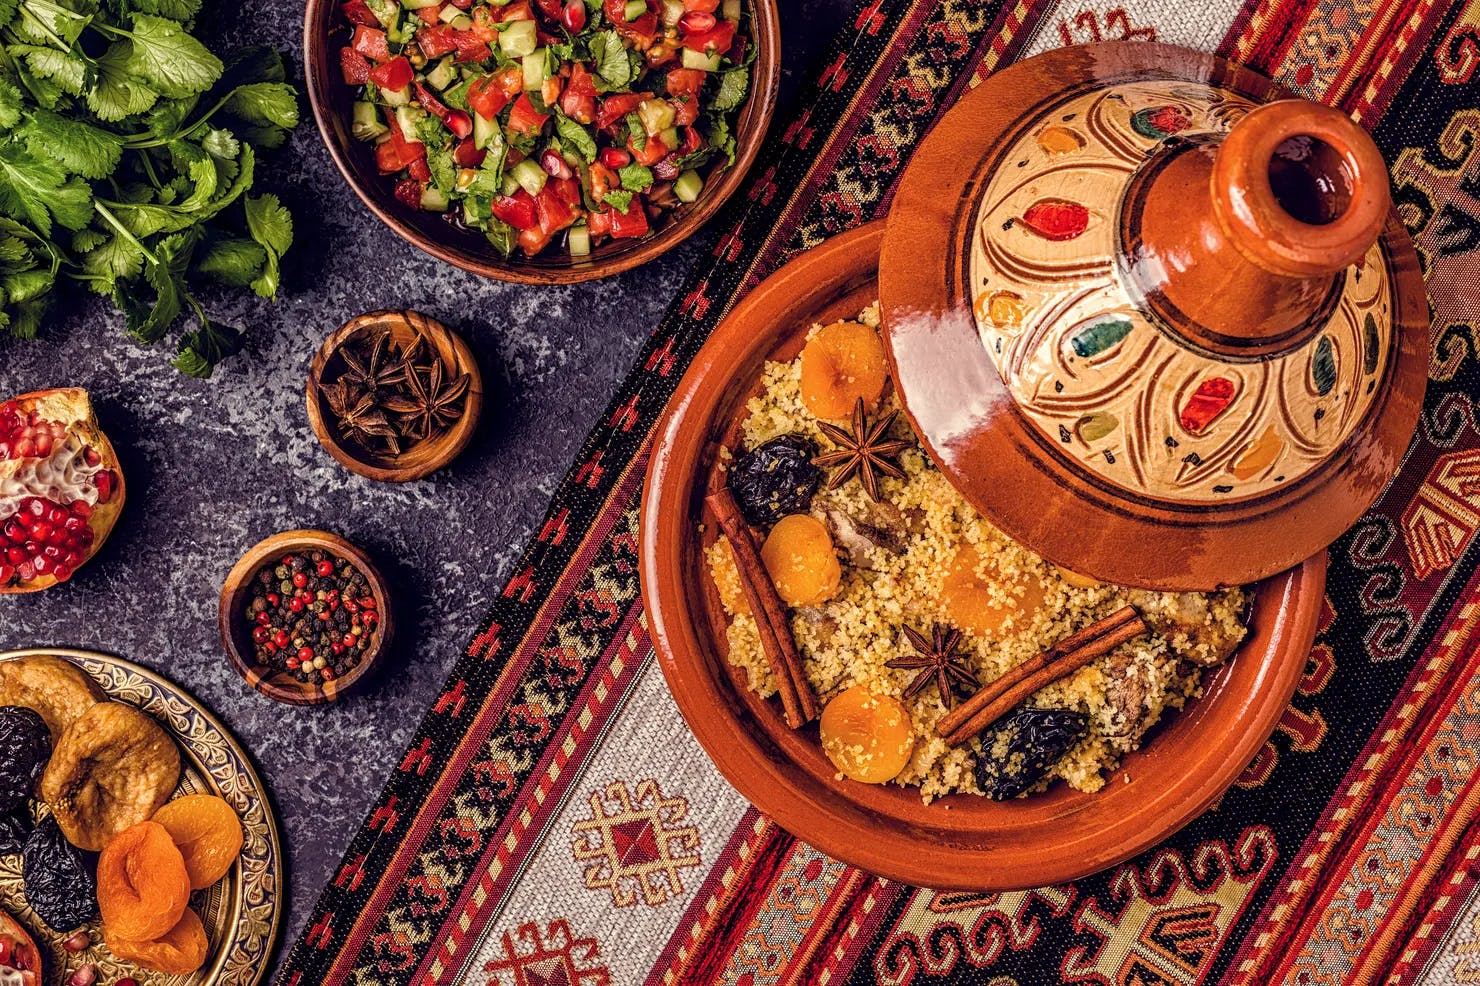 Traditional moroccan tajine of chicken with dried fruits and spices